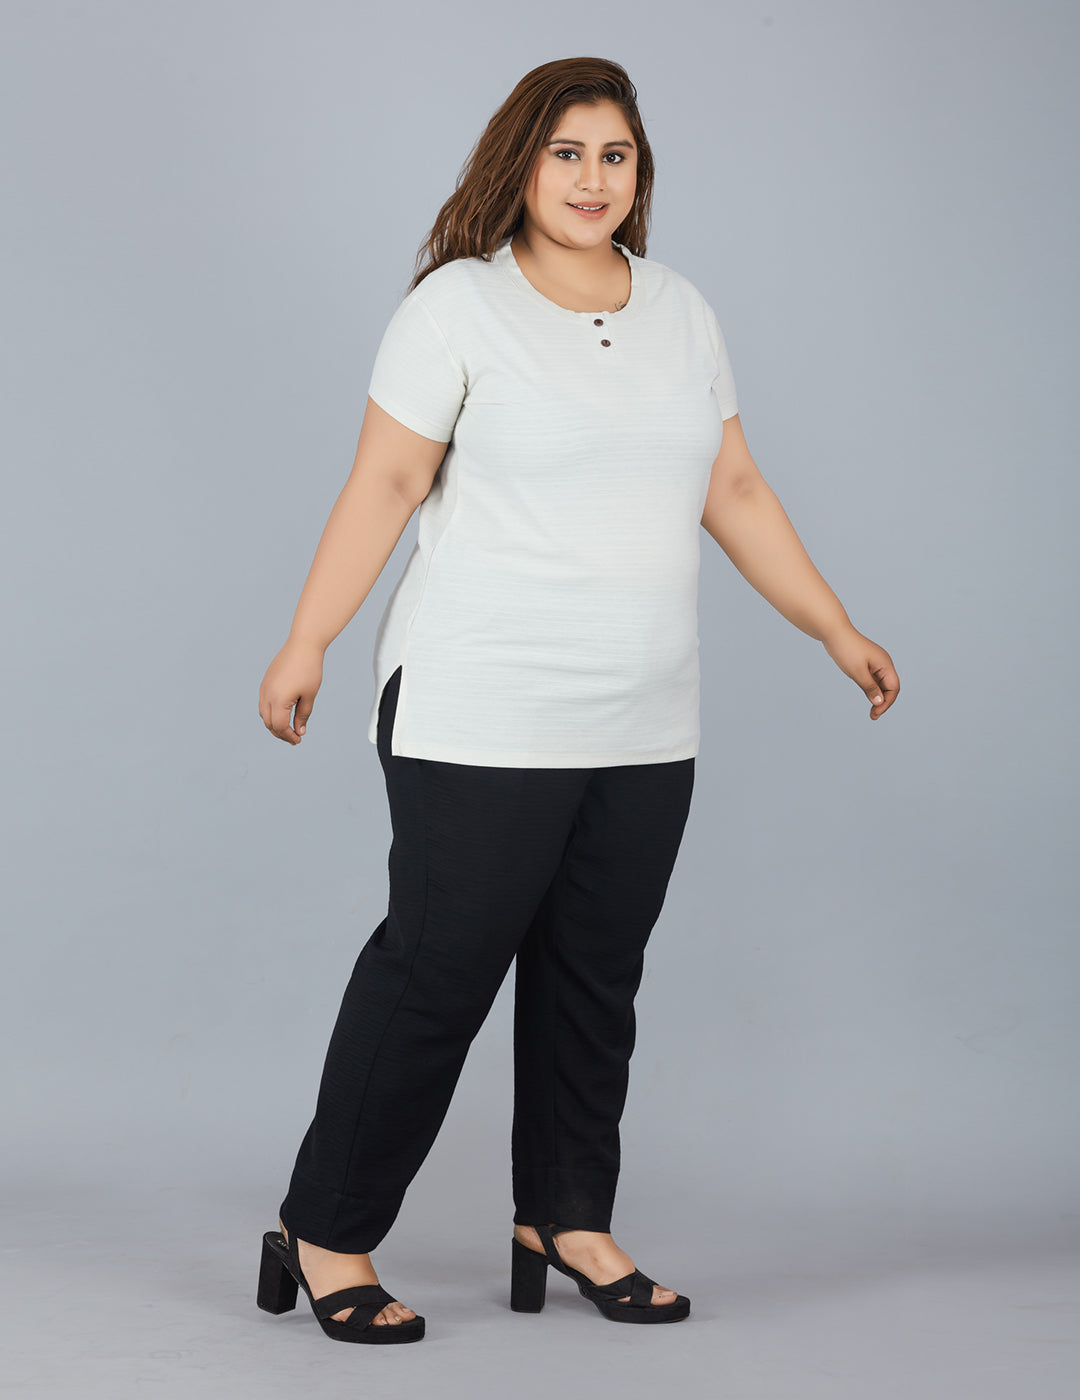 Stylish Plus Size Cotton T-shirts For Women in summer - Off White At Best Prices